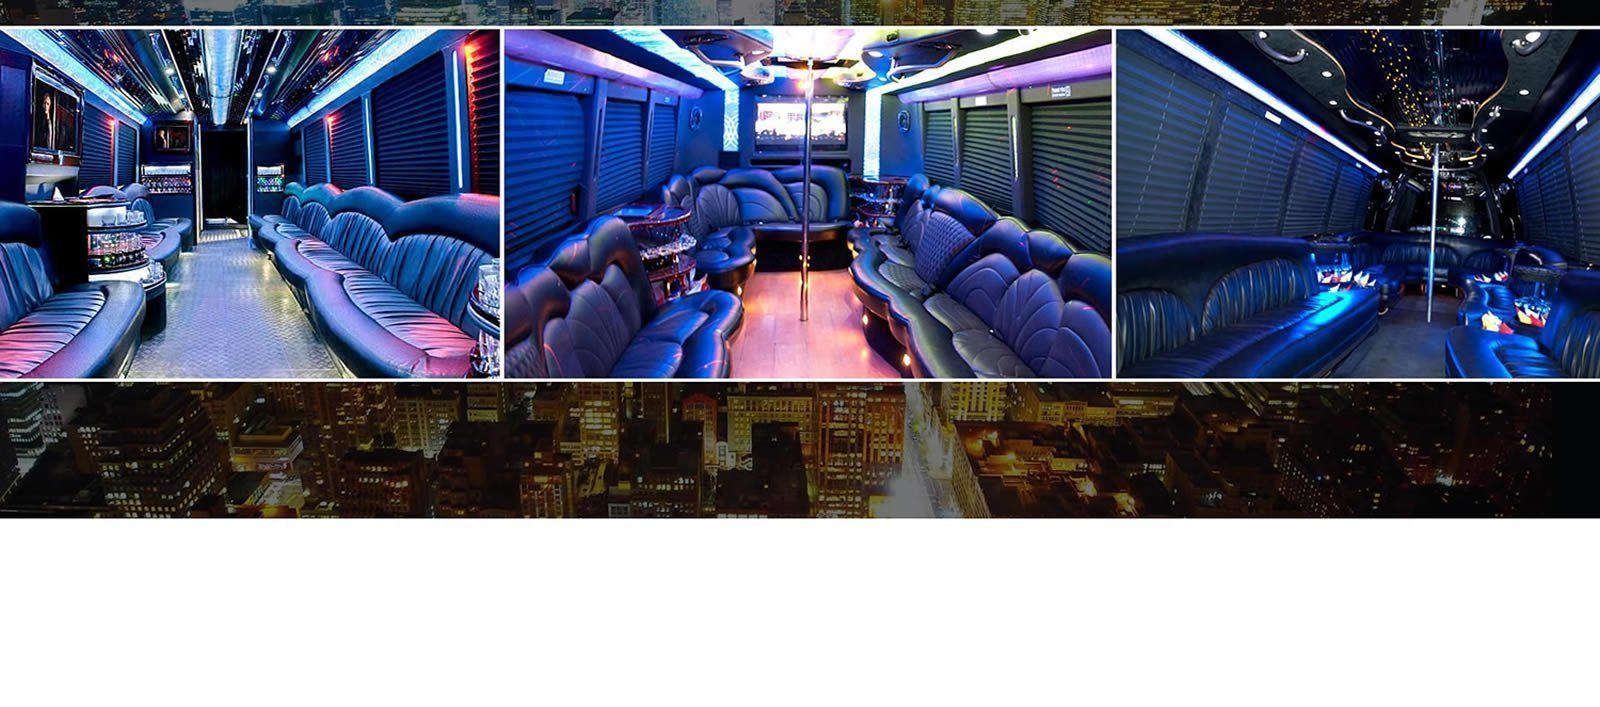 Party Bus Service Chicago